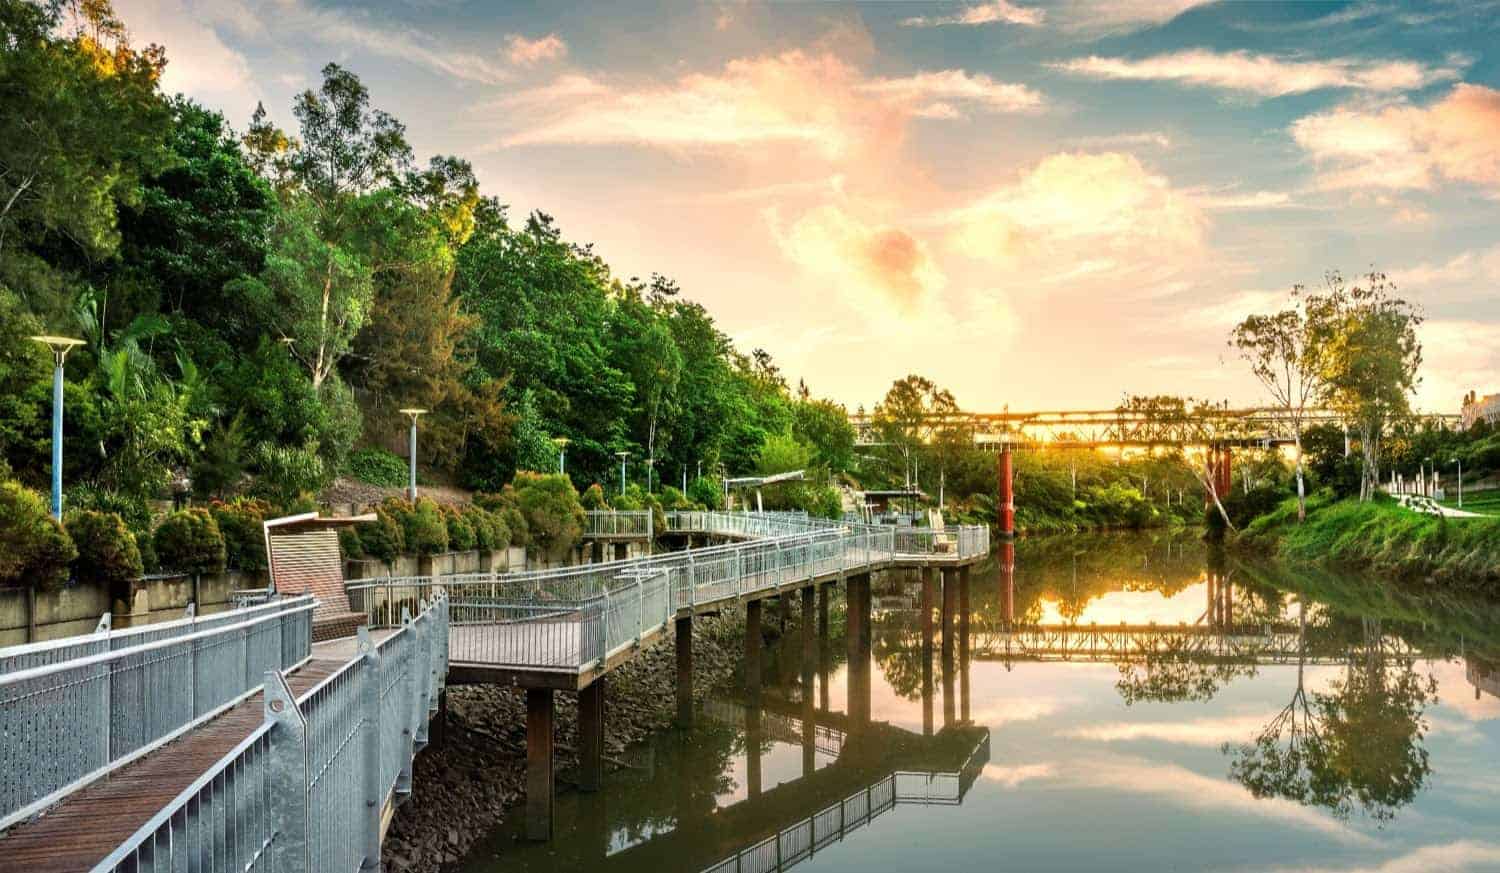 River-Heart-Parklands - 15 cool things to do in Ipswich